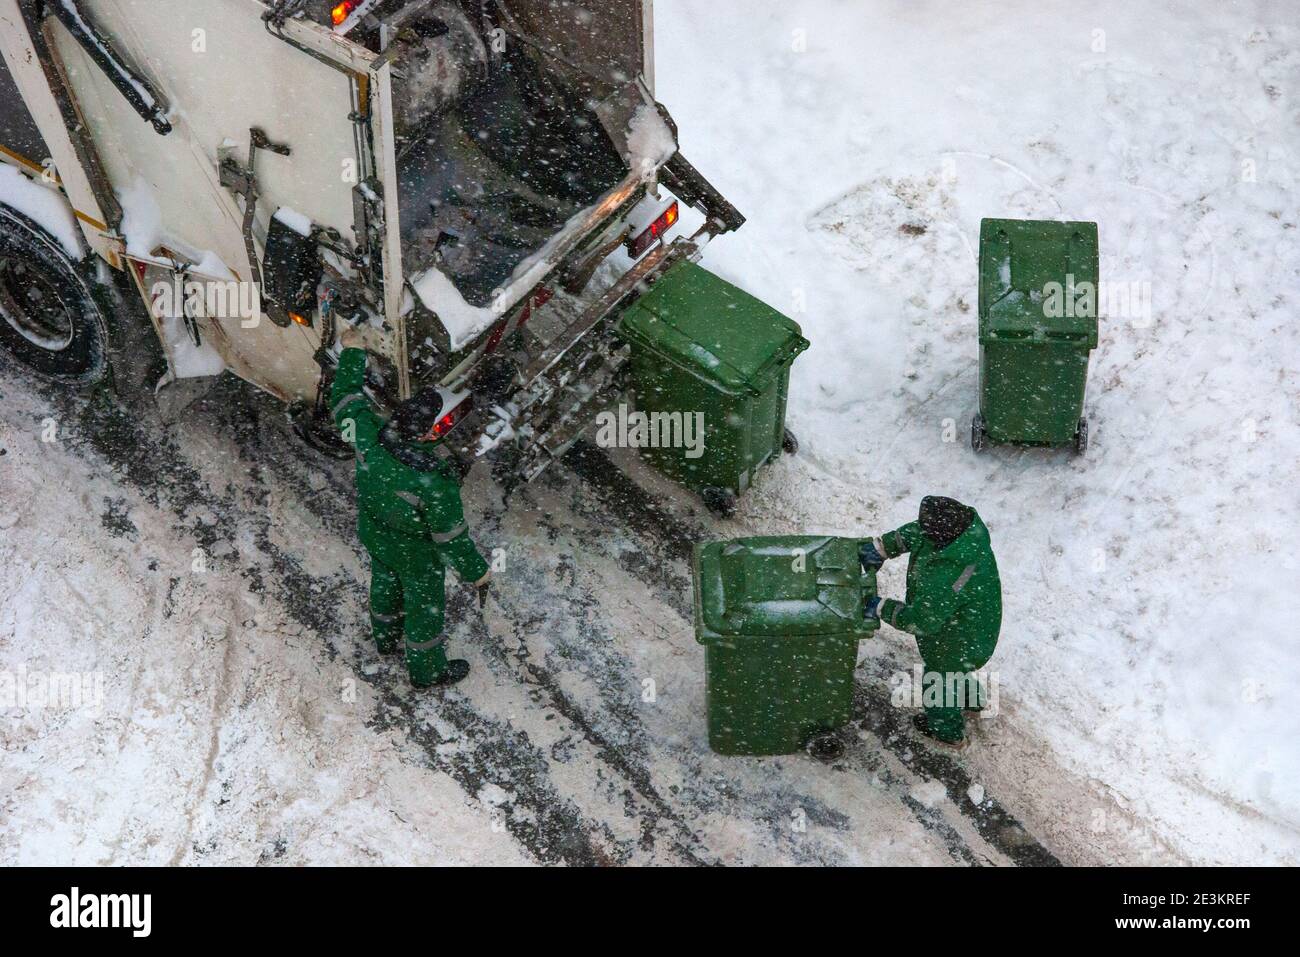 household waste collection in winter snowy weather Stock Photo